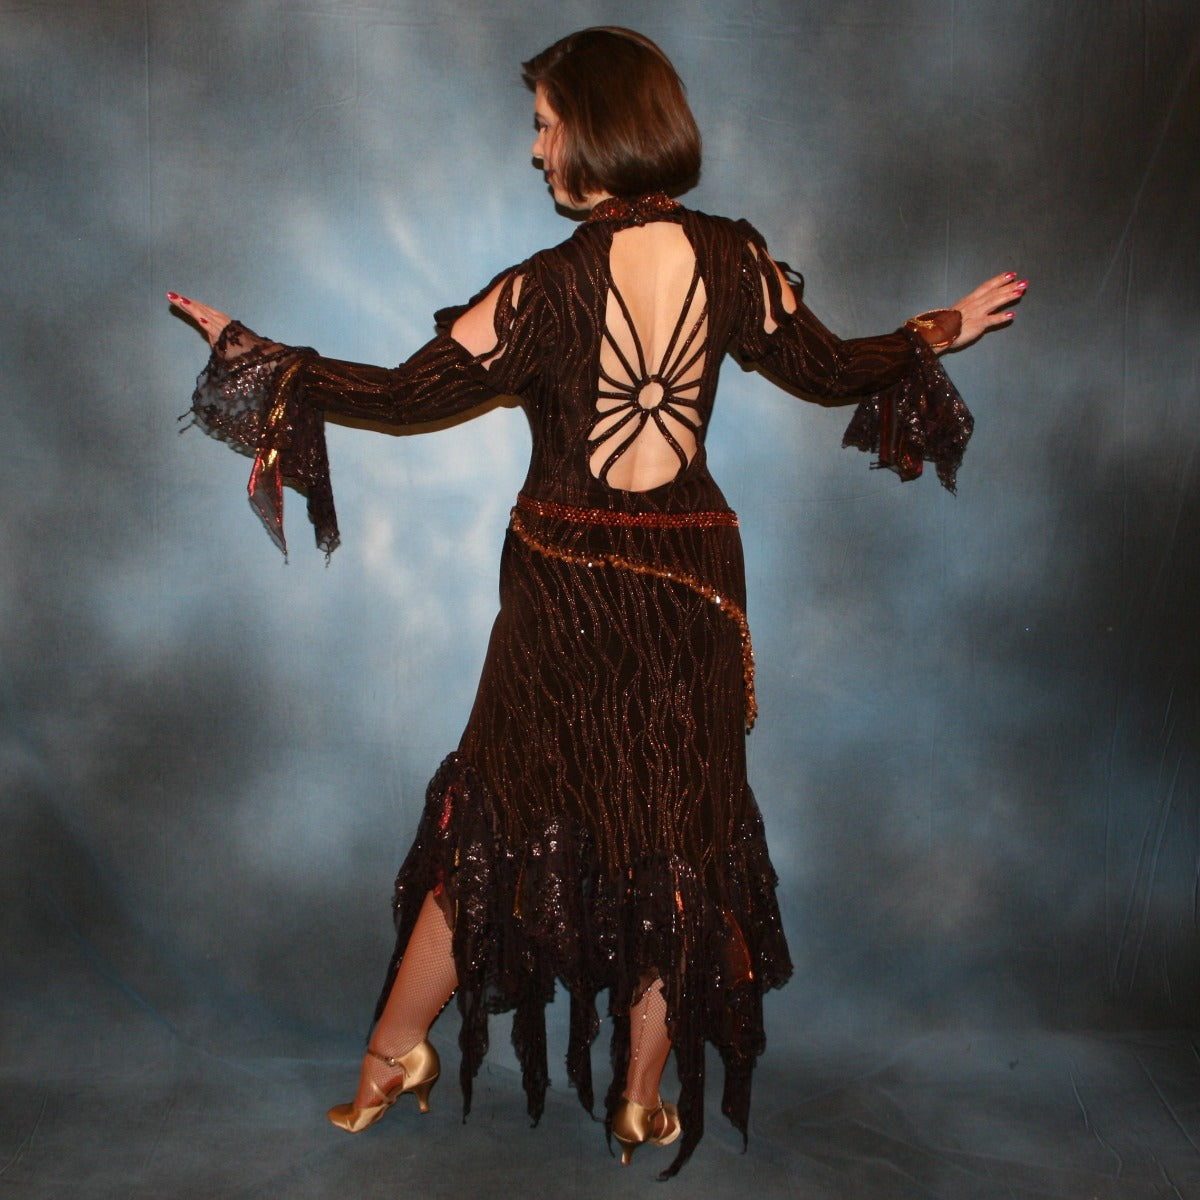 back view of Brown tango dress, bolero dress or rumba dress created in chocolate brown &amp; bronze glitter slinky with chocolate brown metallic lace &amp; metallic tricot flounces is embellished with crystal copper Swarovski rhinestones at neckpiece & hipsash, which also has extensive hand beading.